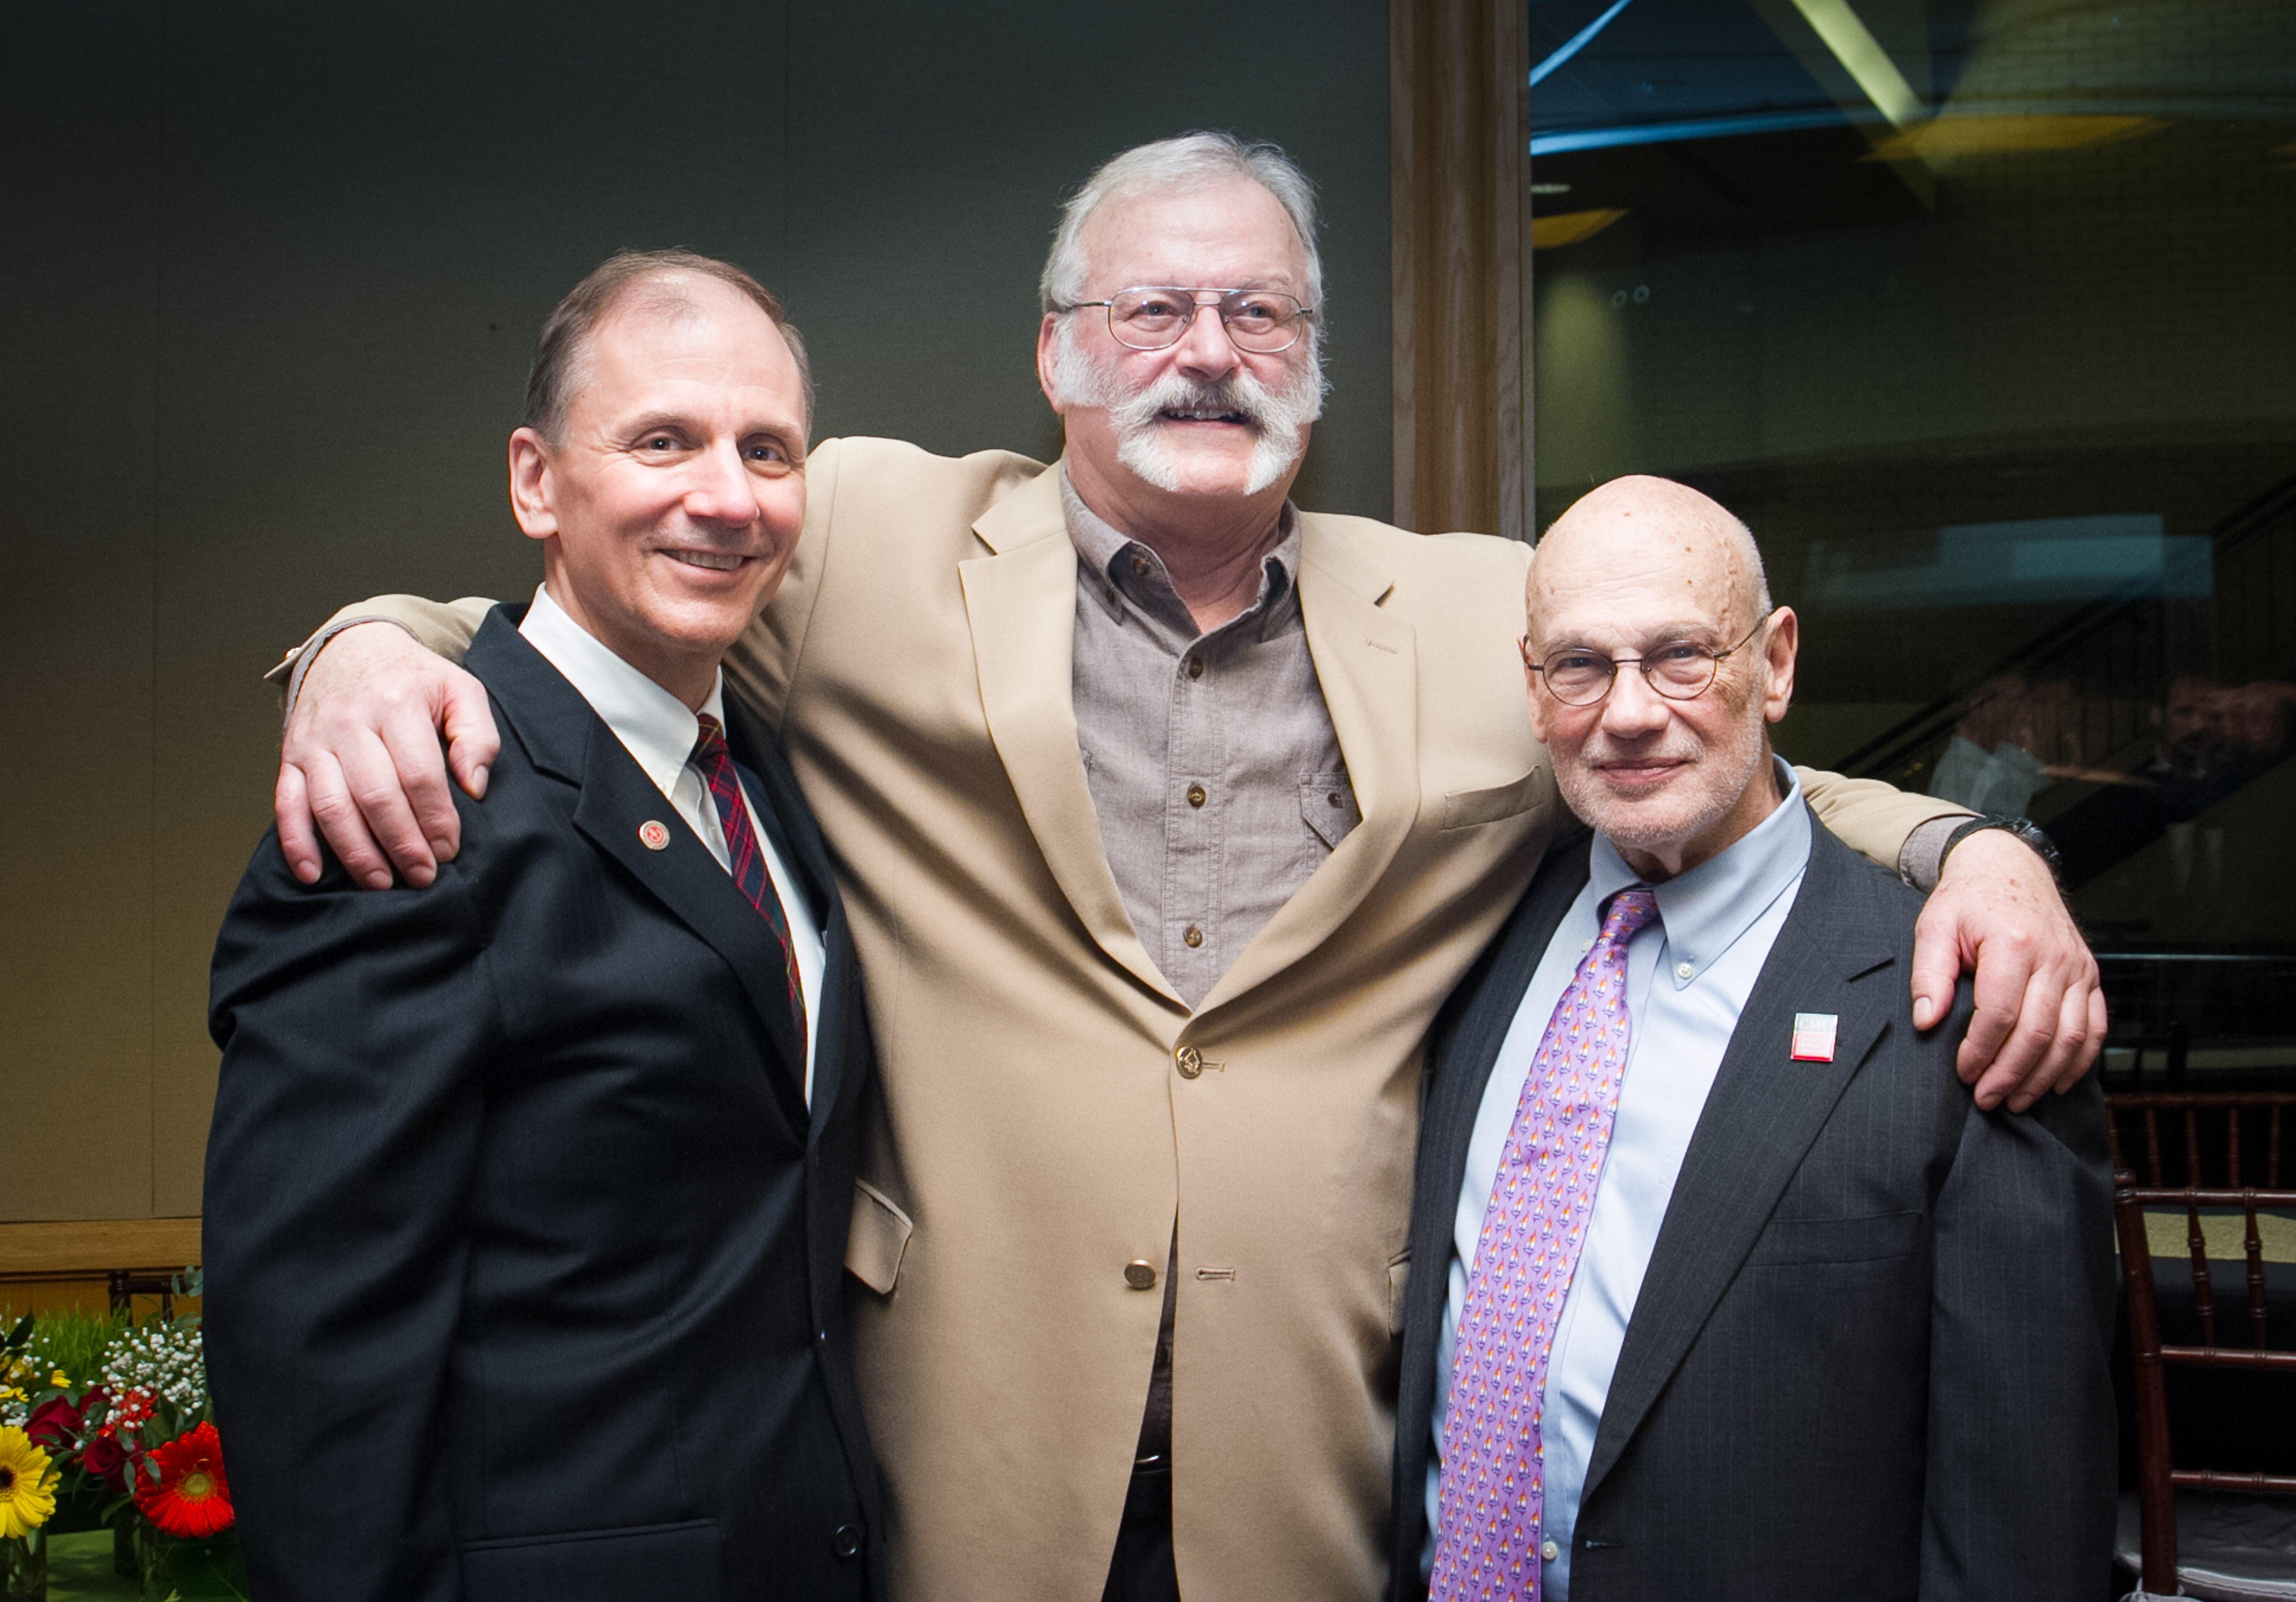 David Dzombak, Larry Cartwright, and Fran McMichael at Larry Cartwright's retirement event